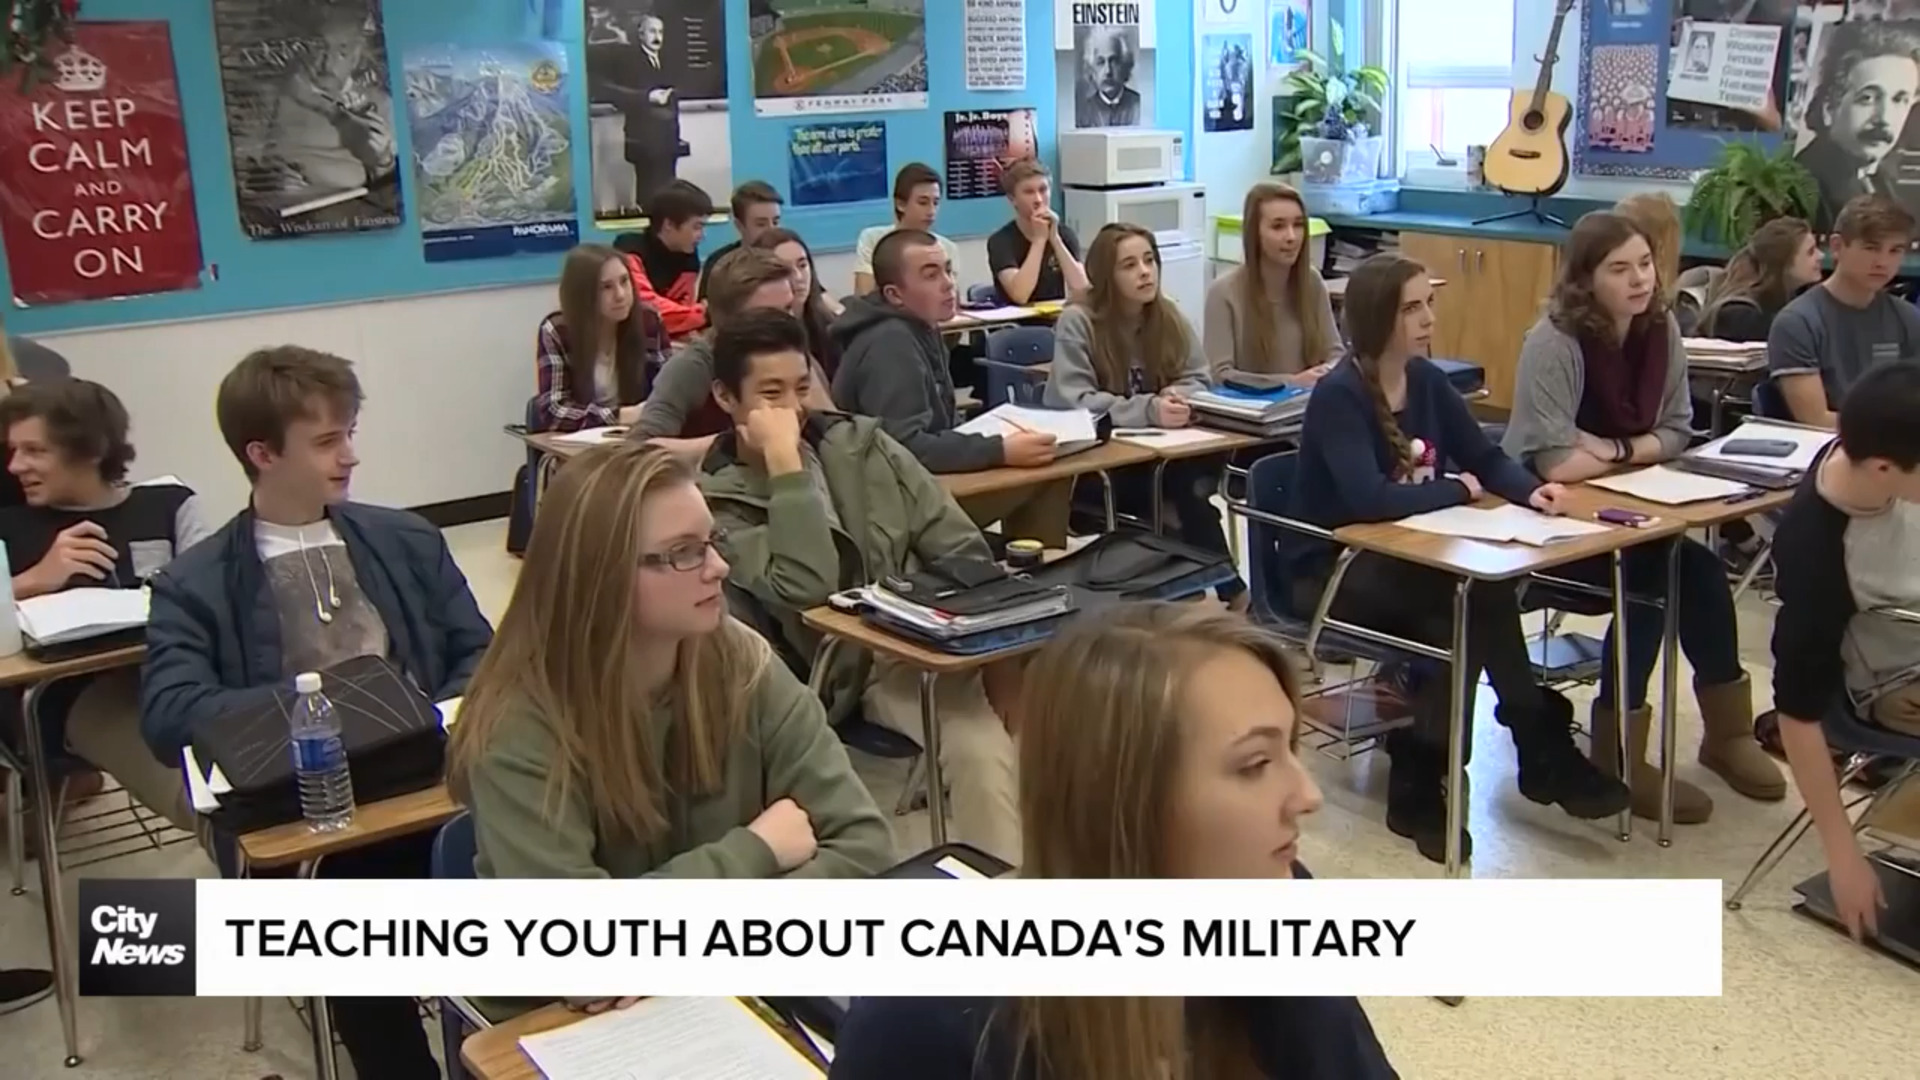 New tool for teaching Canadian military history